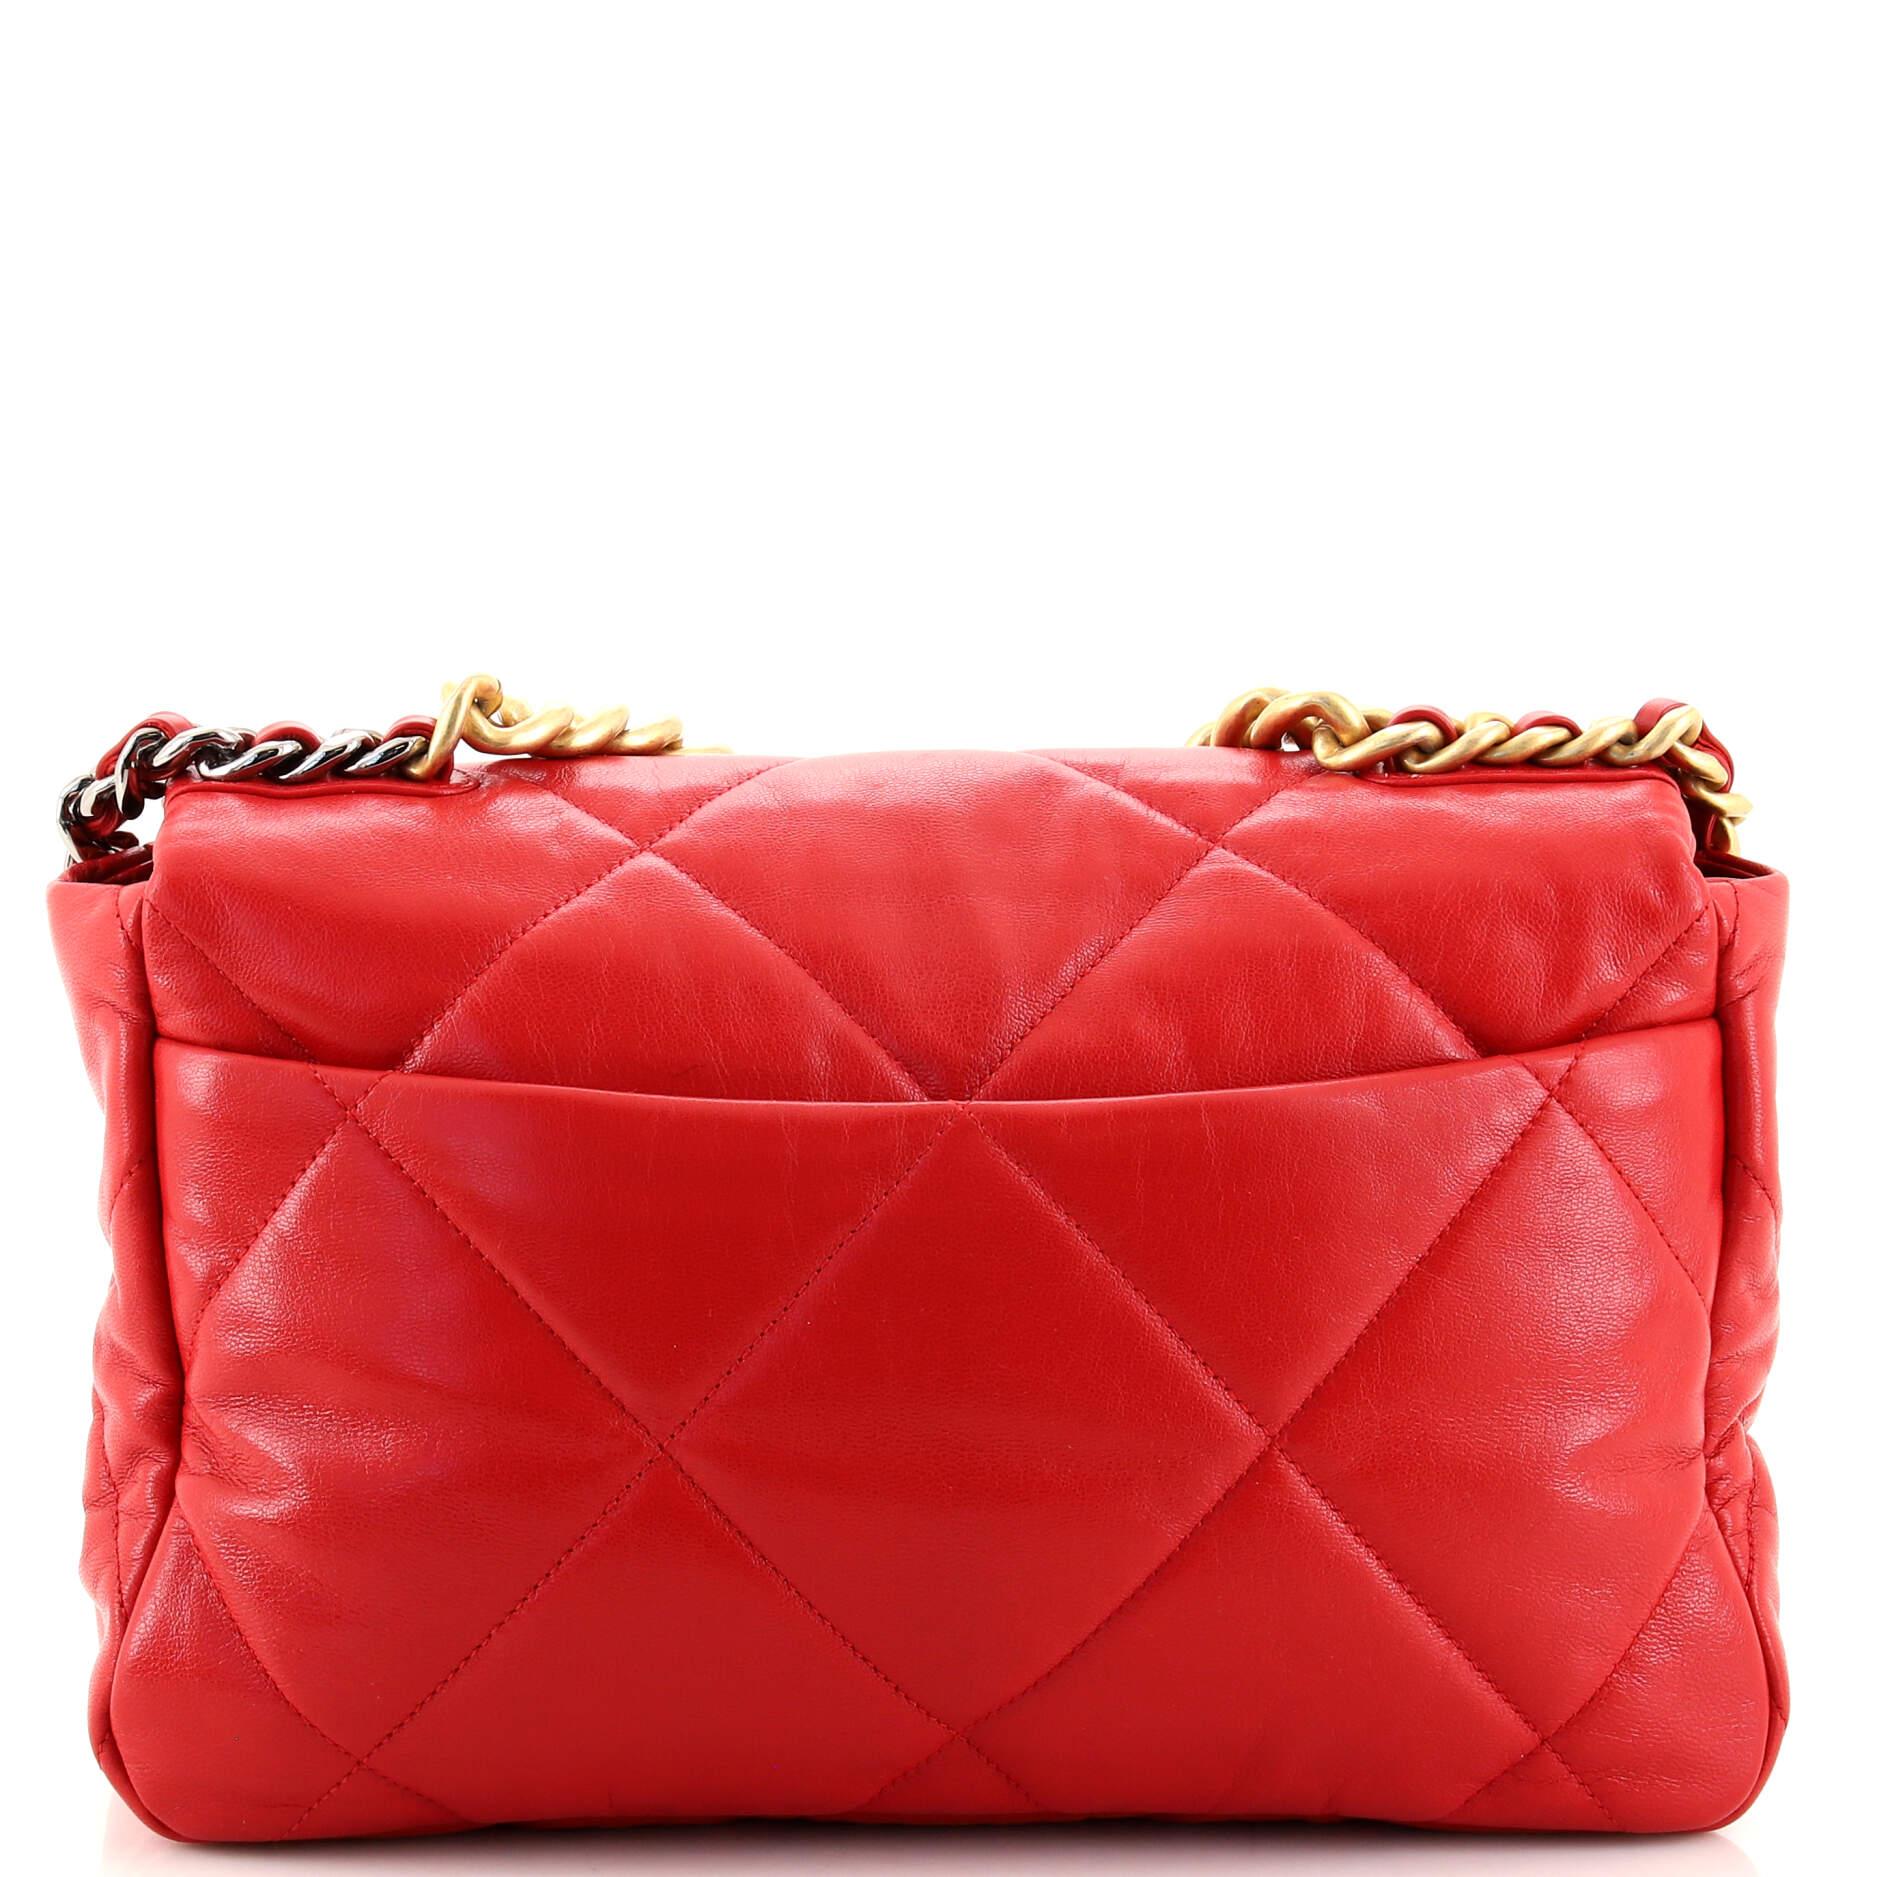 Red Chanel 19 Flap Bag Quilted Lambskin Large